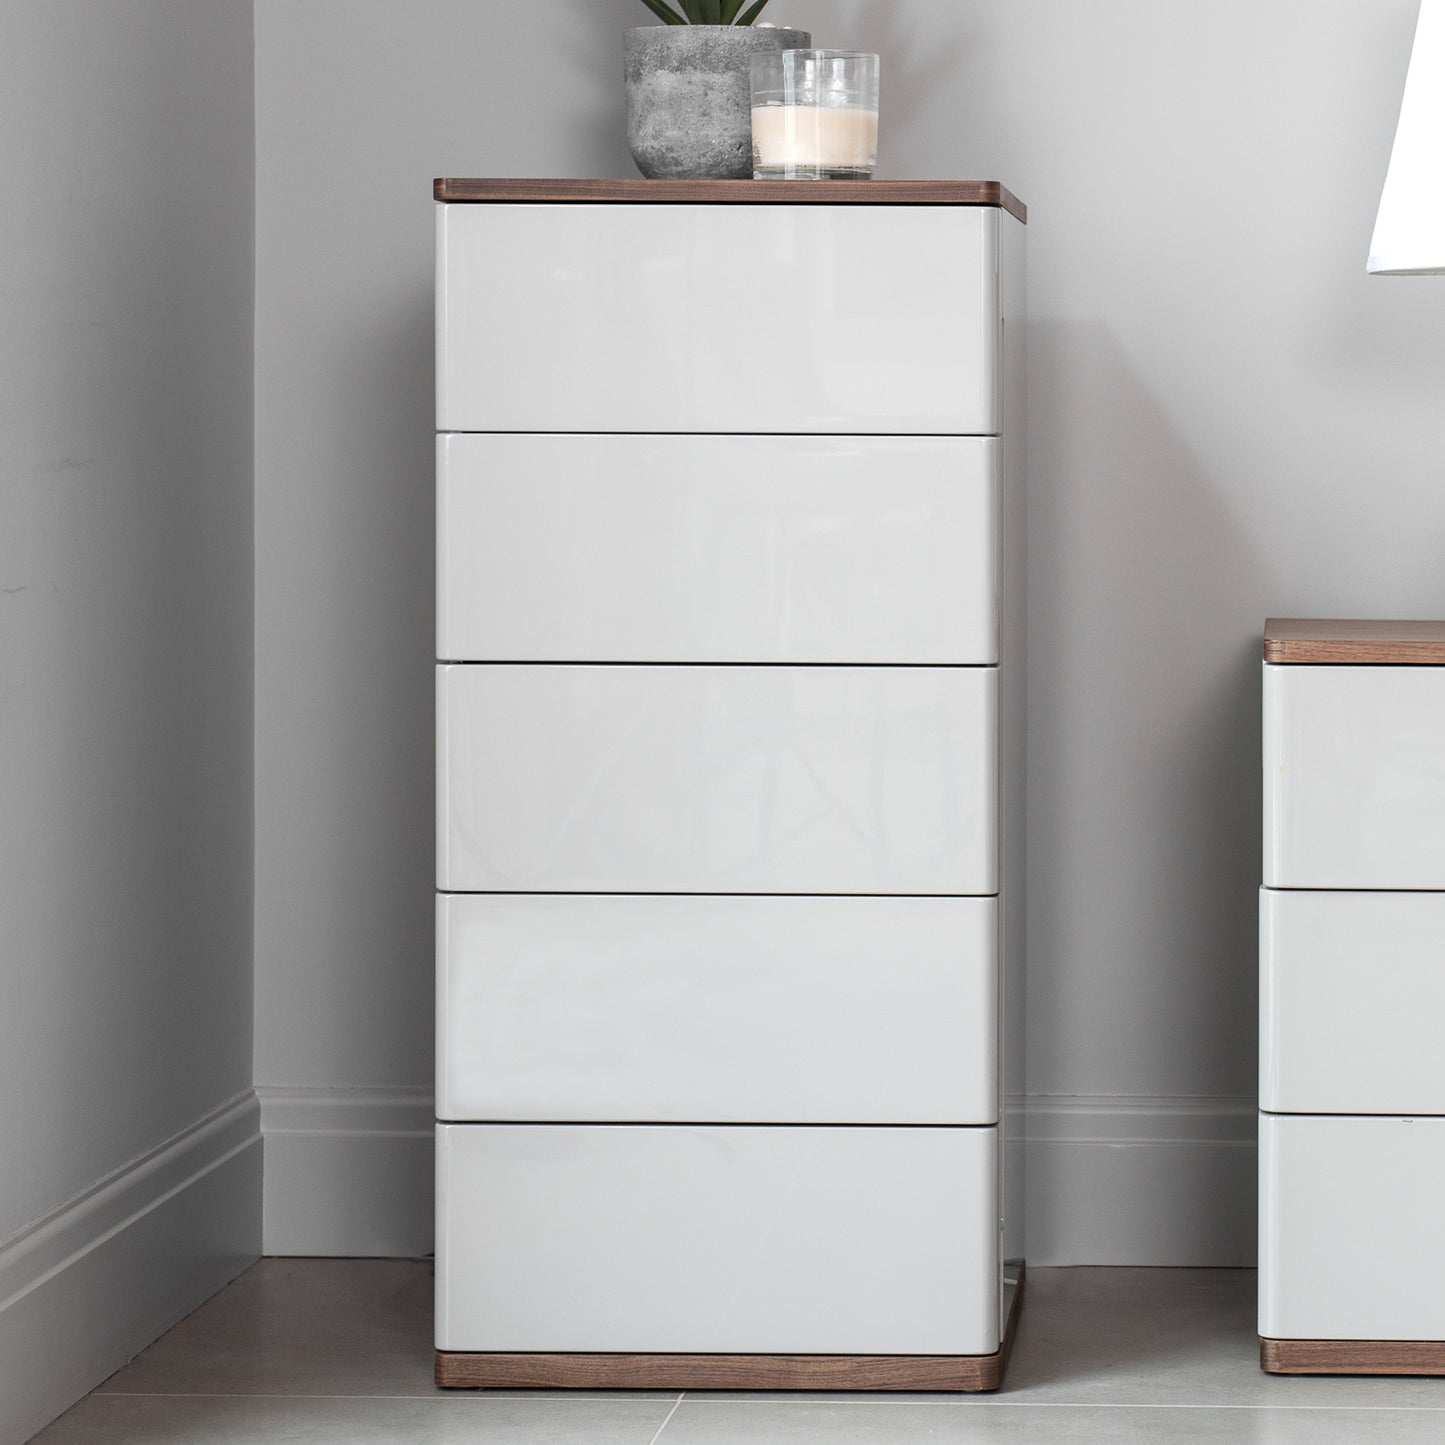 Crofton Park Chest of Drawers - 5 Drawer Tall Narrow